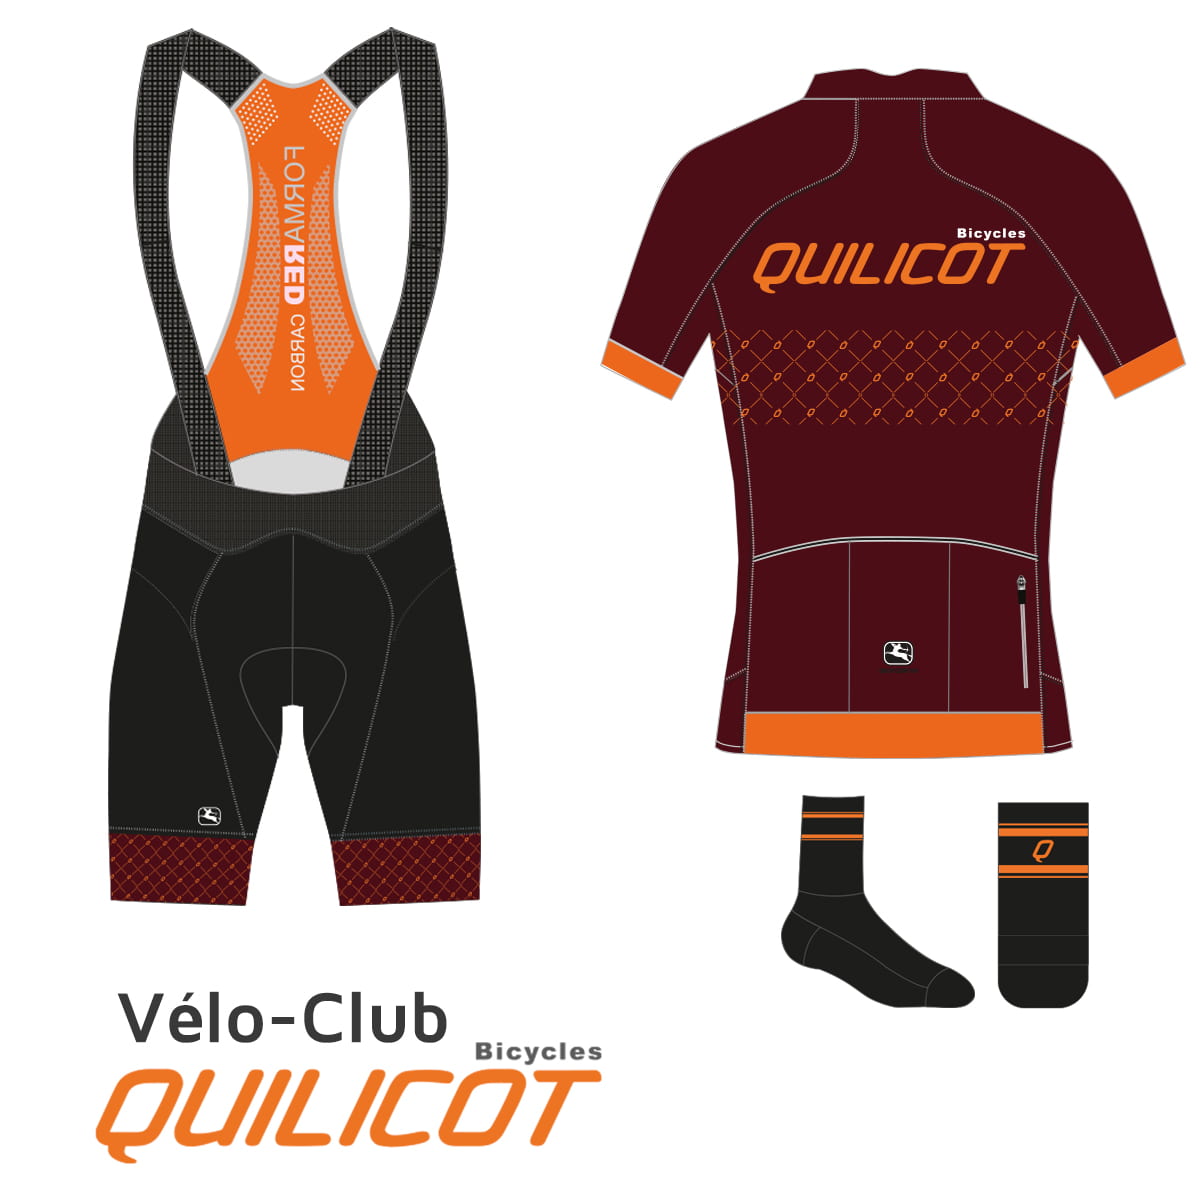 MAILLOT VELO CLUB HOMME 2020